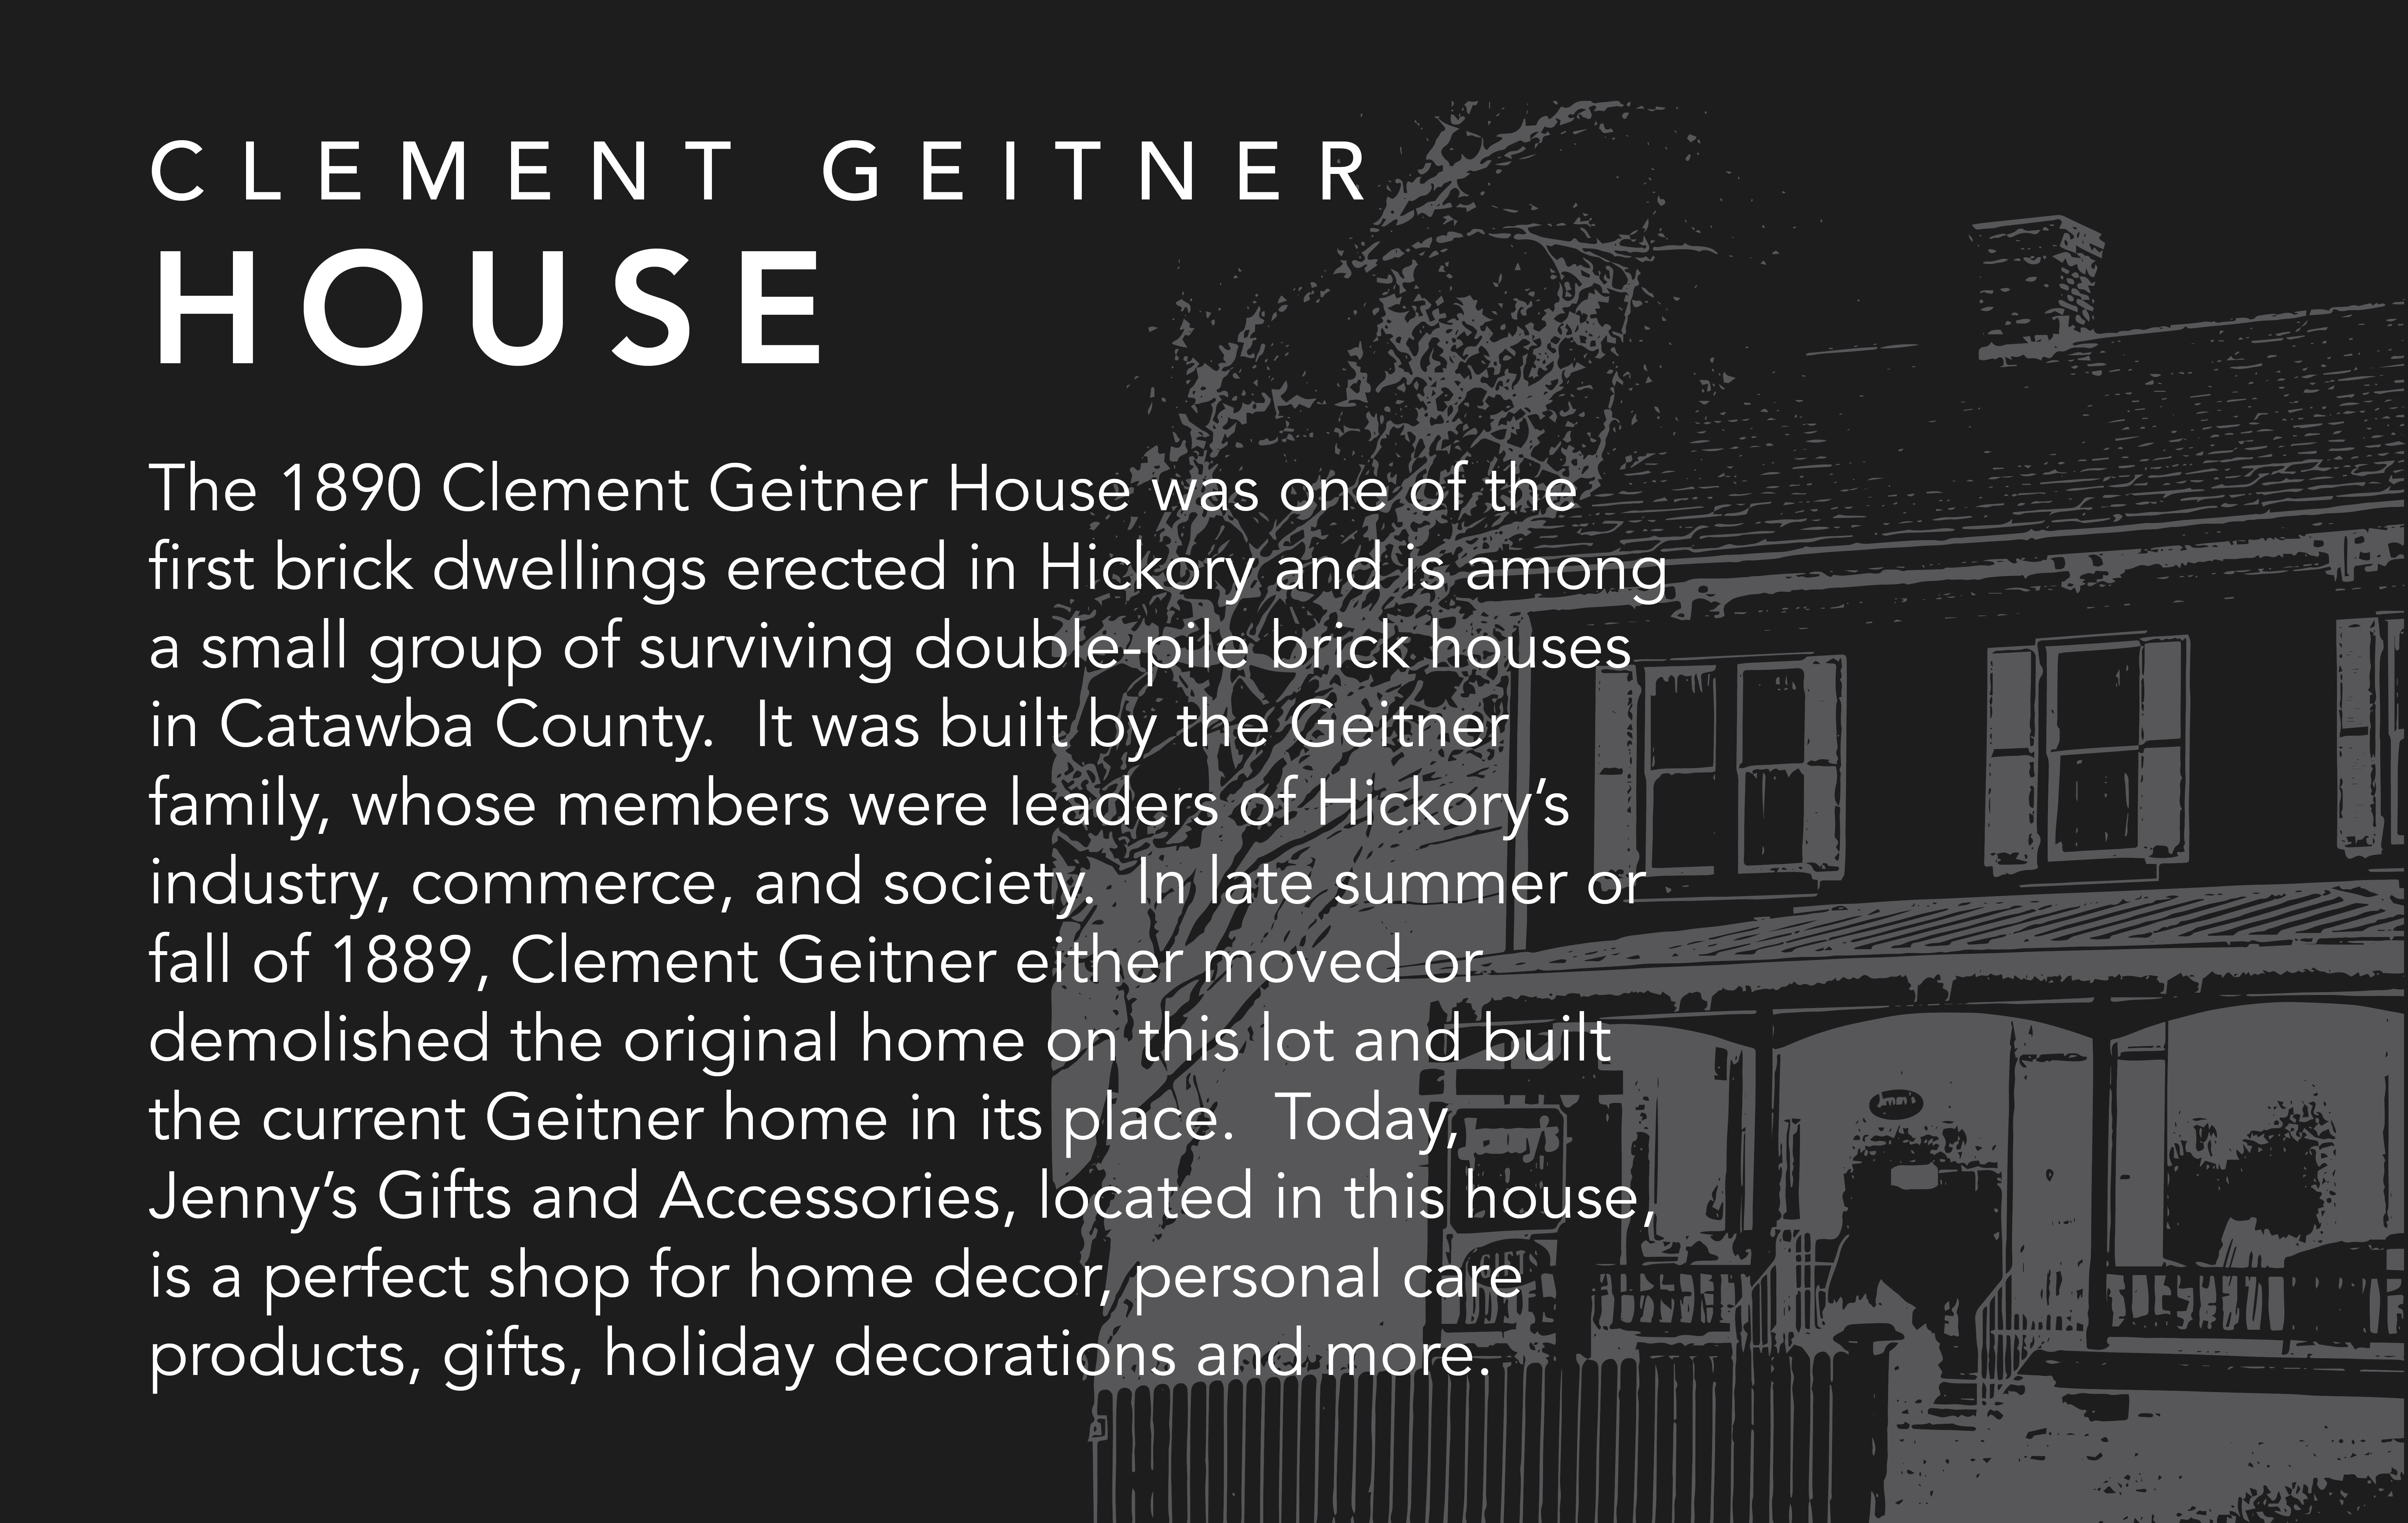 Clement Geitner House